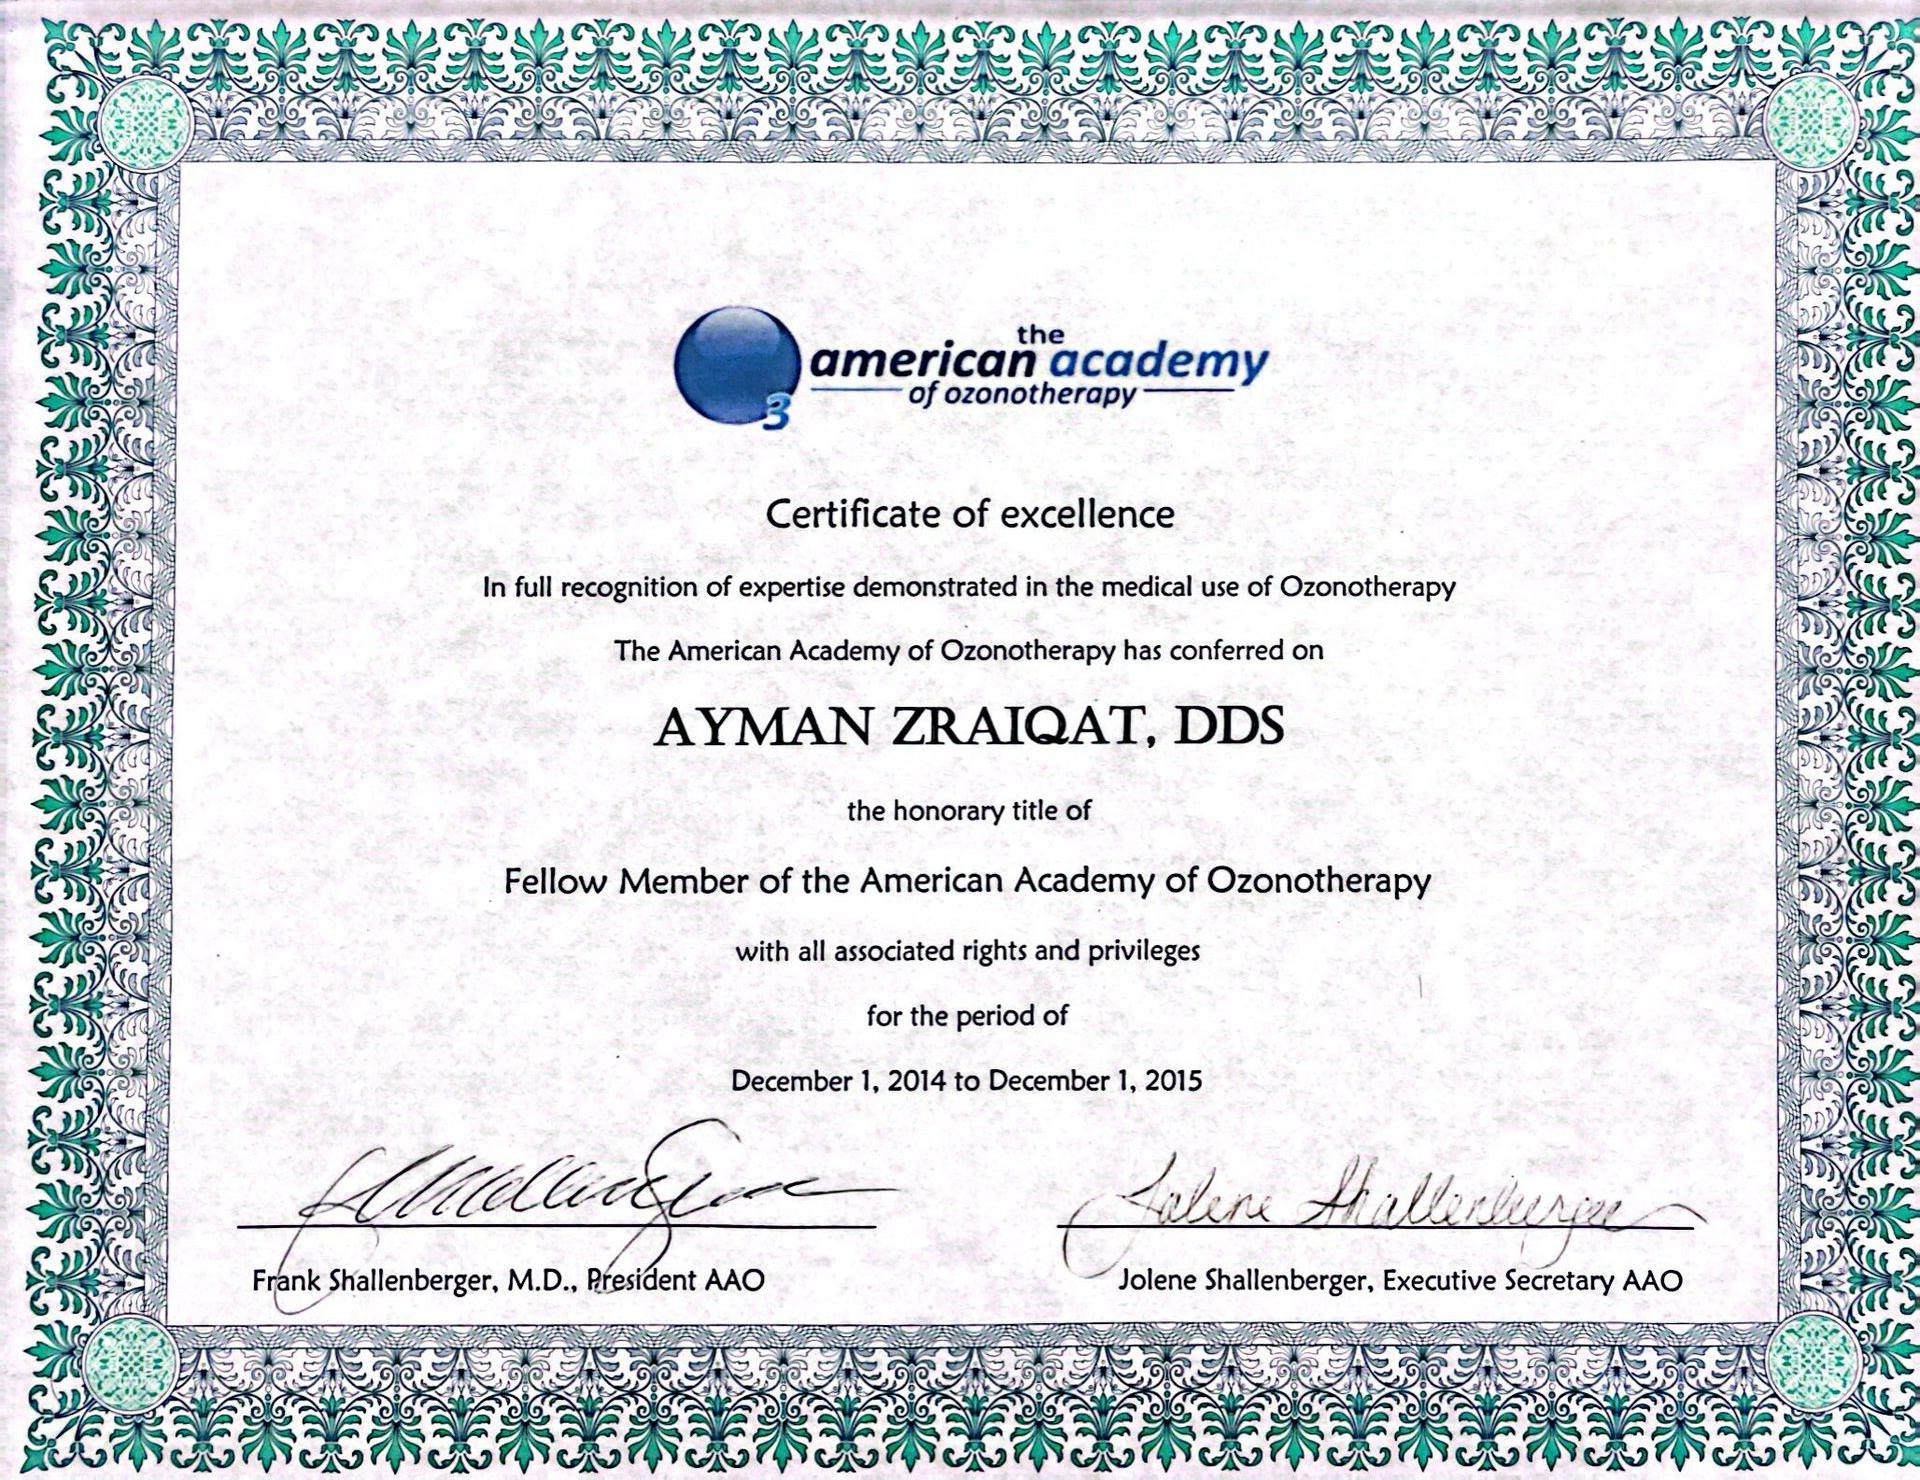 Certificate of excellence awarded to Ayman Zraiqat, DDS, as a Fellow Member of the American Academy of Ozonotherapy.